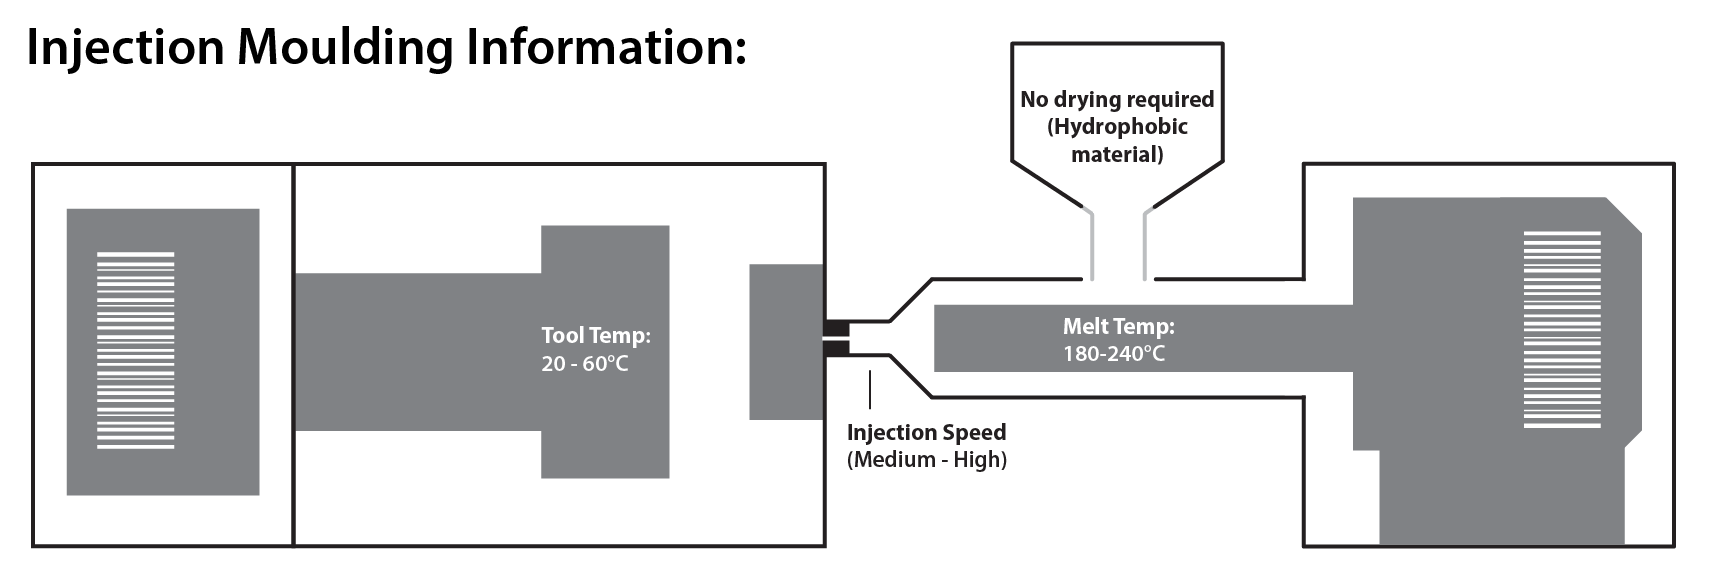 A black and white diagram of injection moulding information